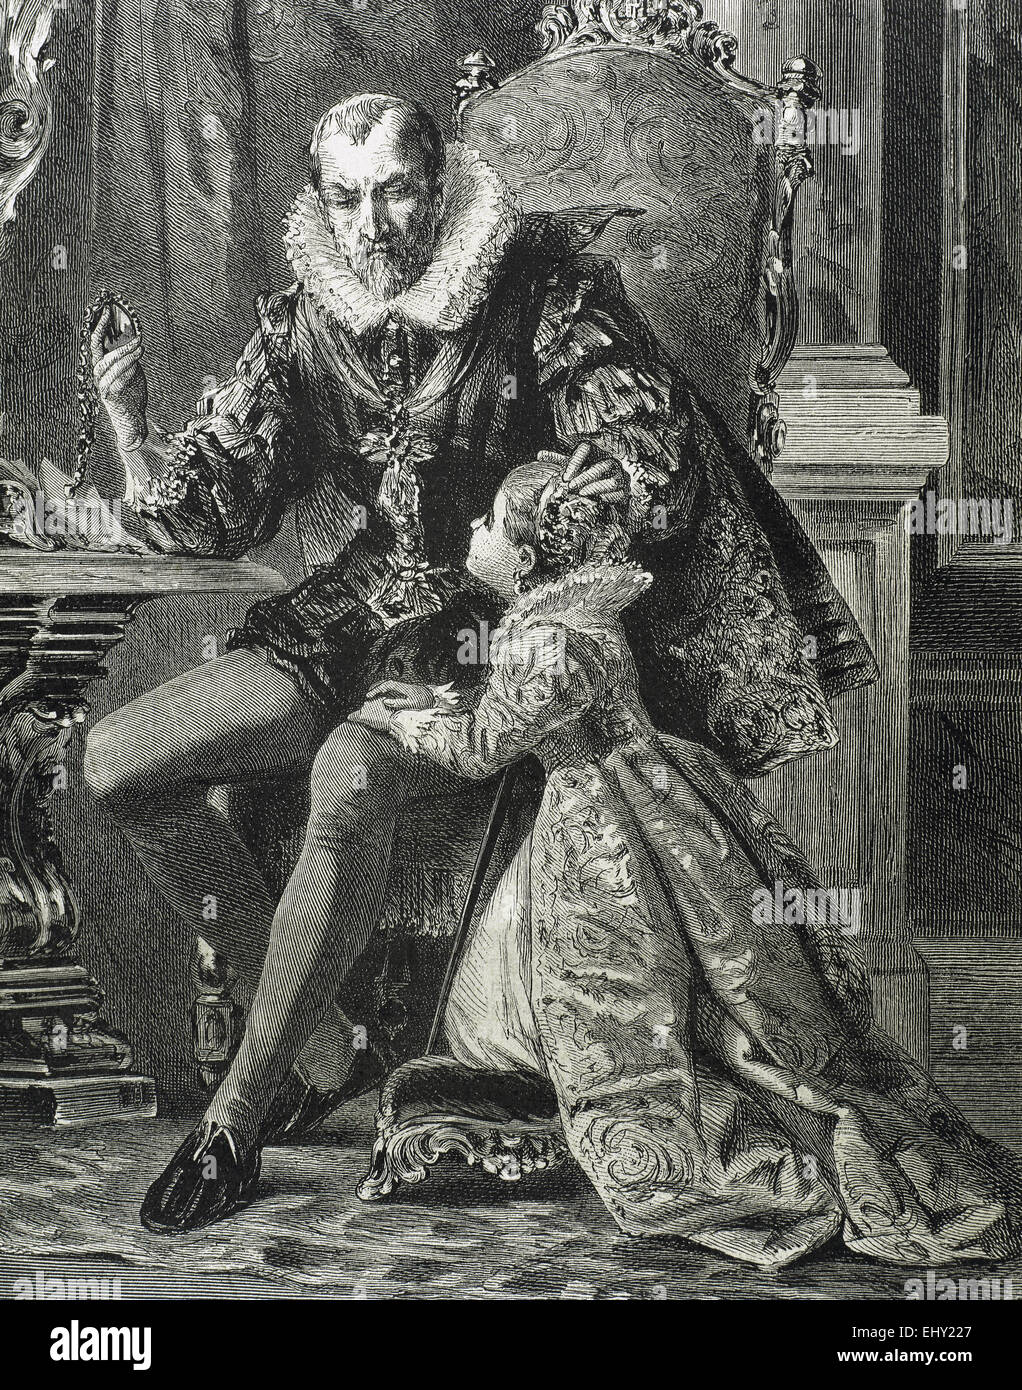 Philip II of Spain (1527-1598). House of Habsburg. King with his son. Engraving. 19th century. Stock Photo